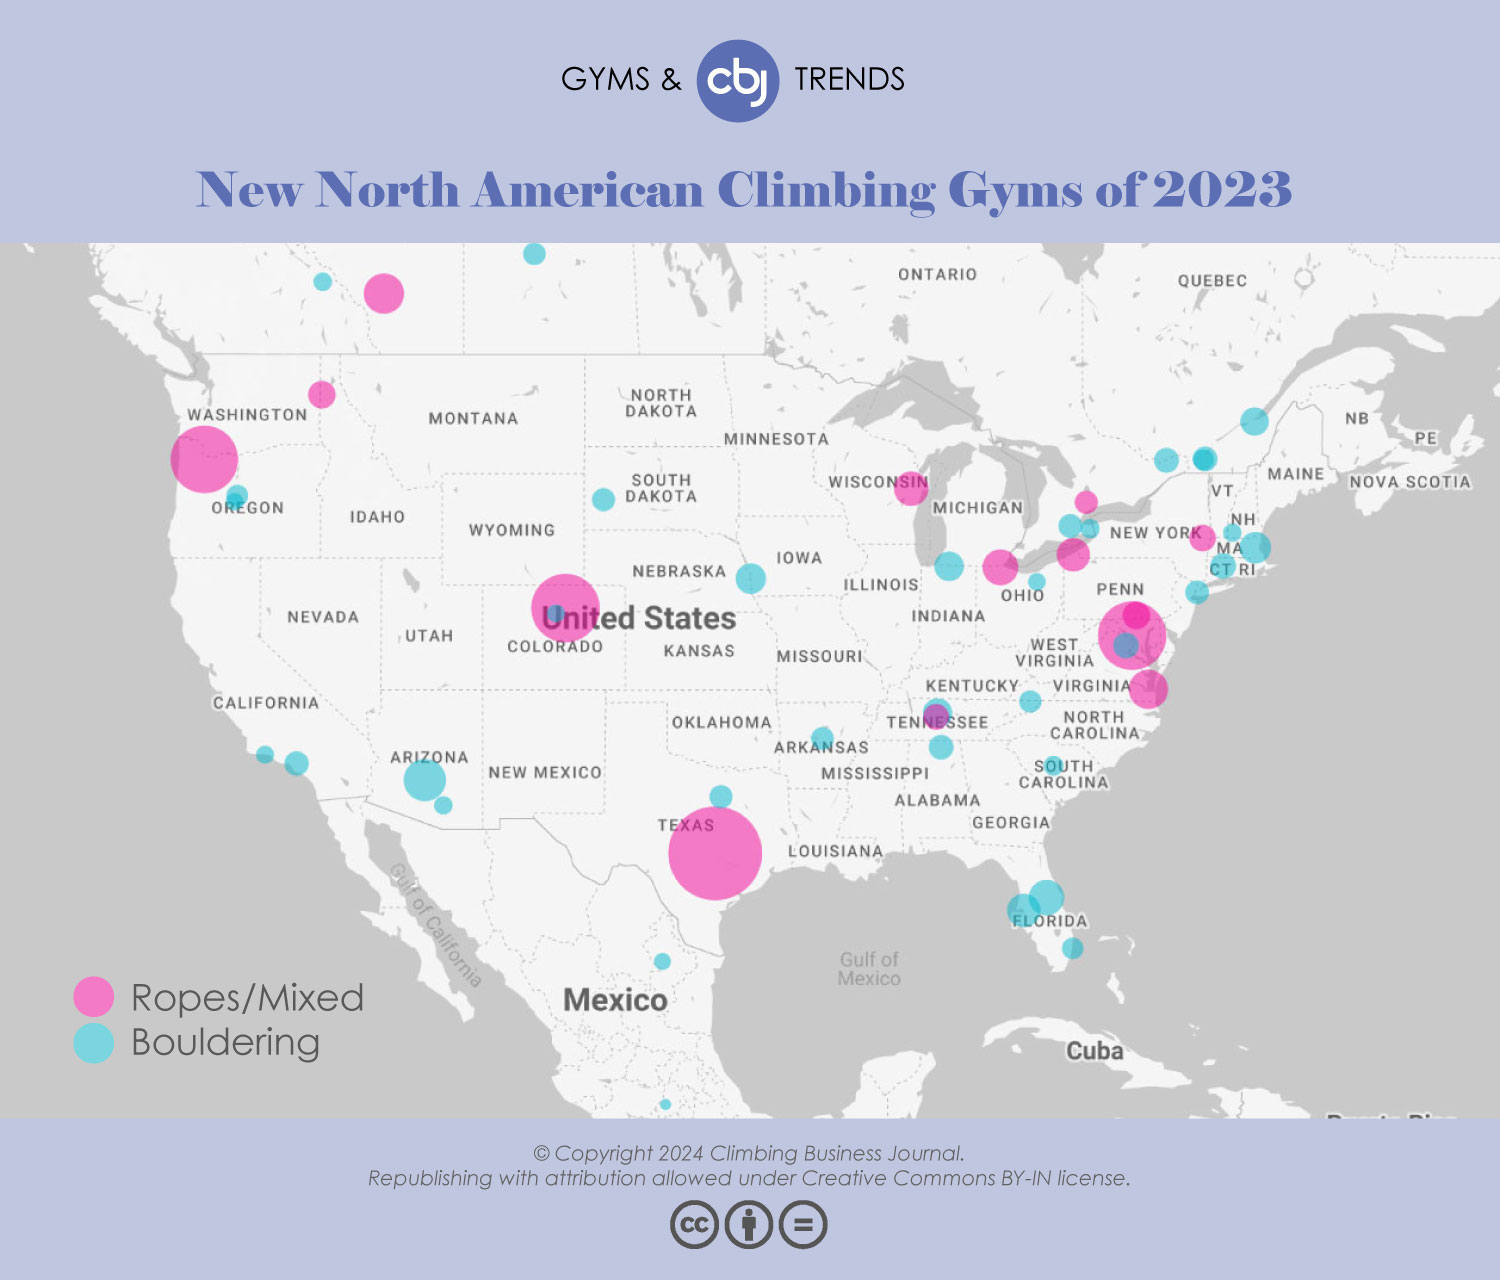 New North American Climbing Gyms of 2023